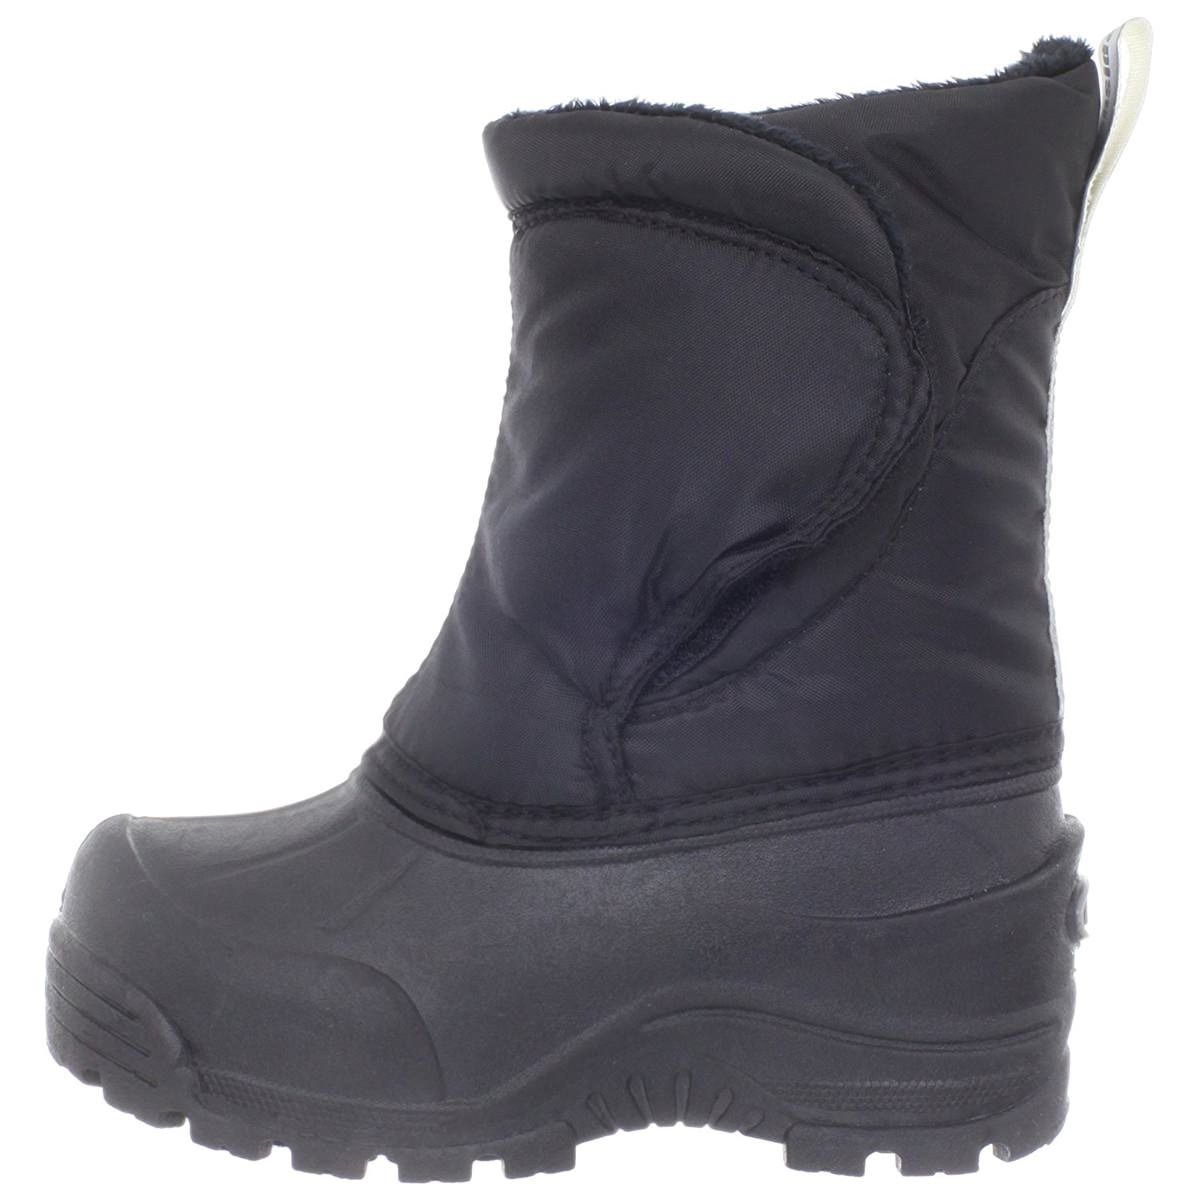 Northside Toddler Toddlers Snoqualmie Snow Boot